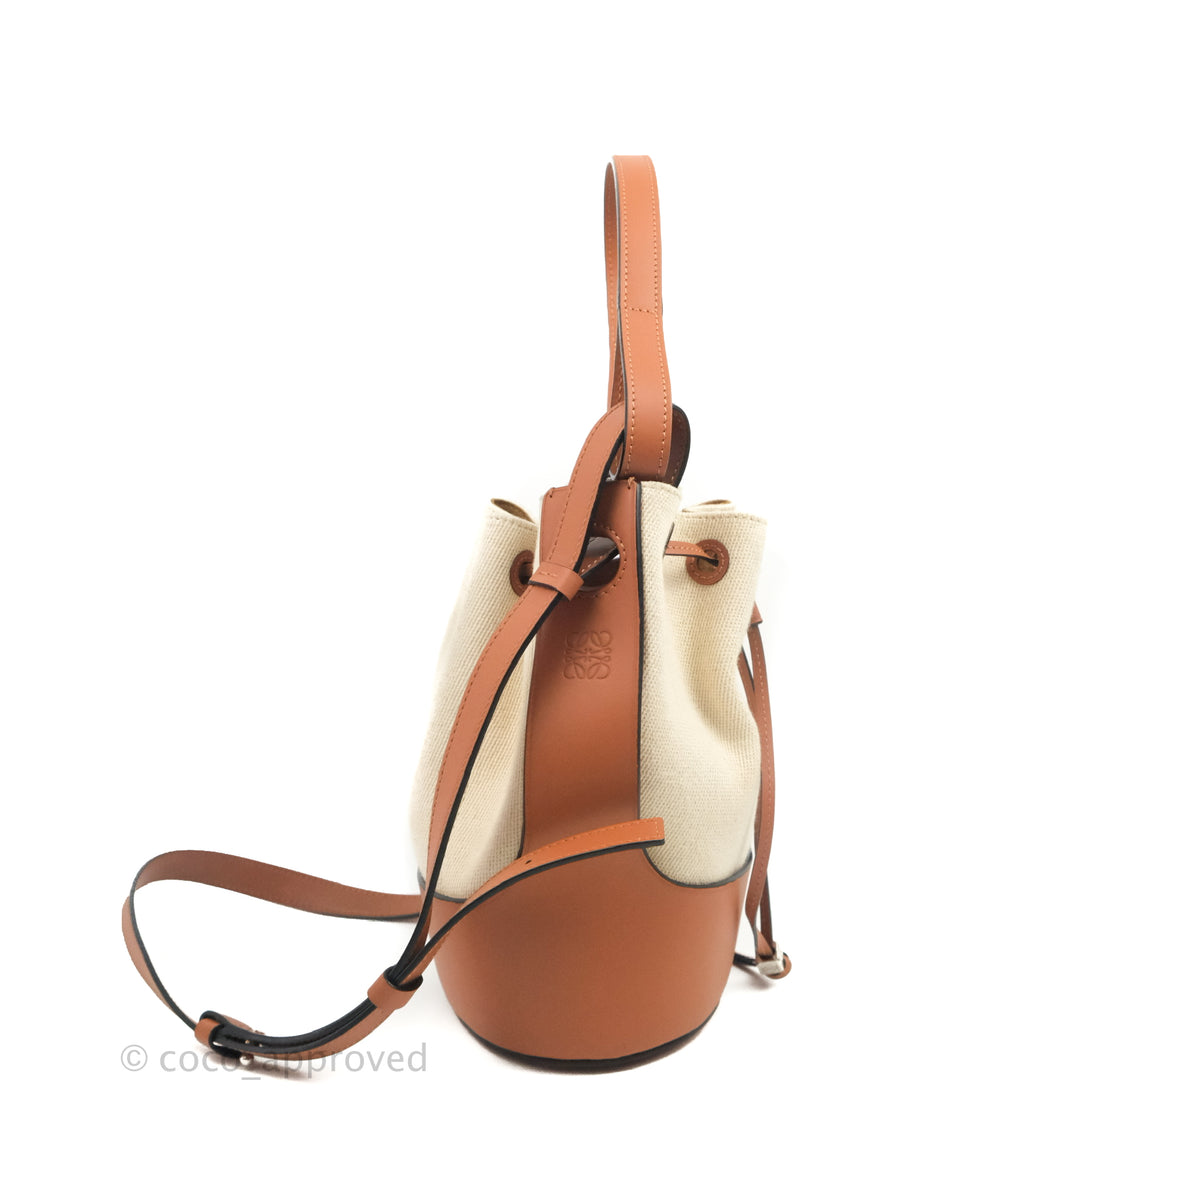 loewe balloon bag, an instant classic. Available now through our